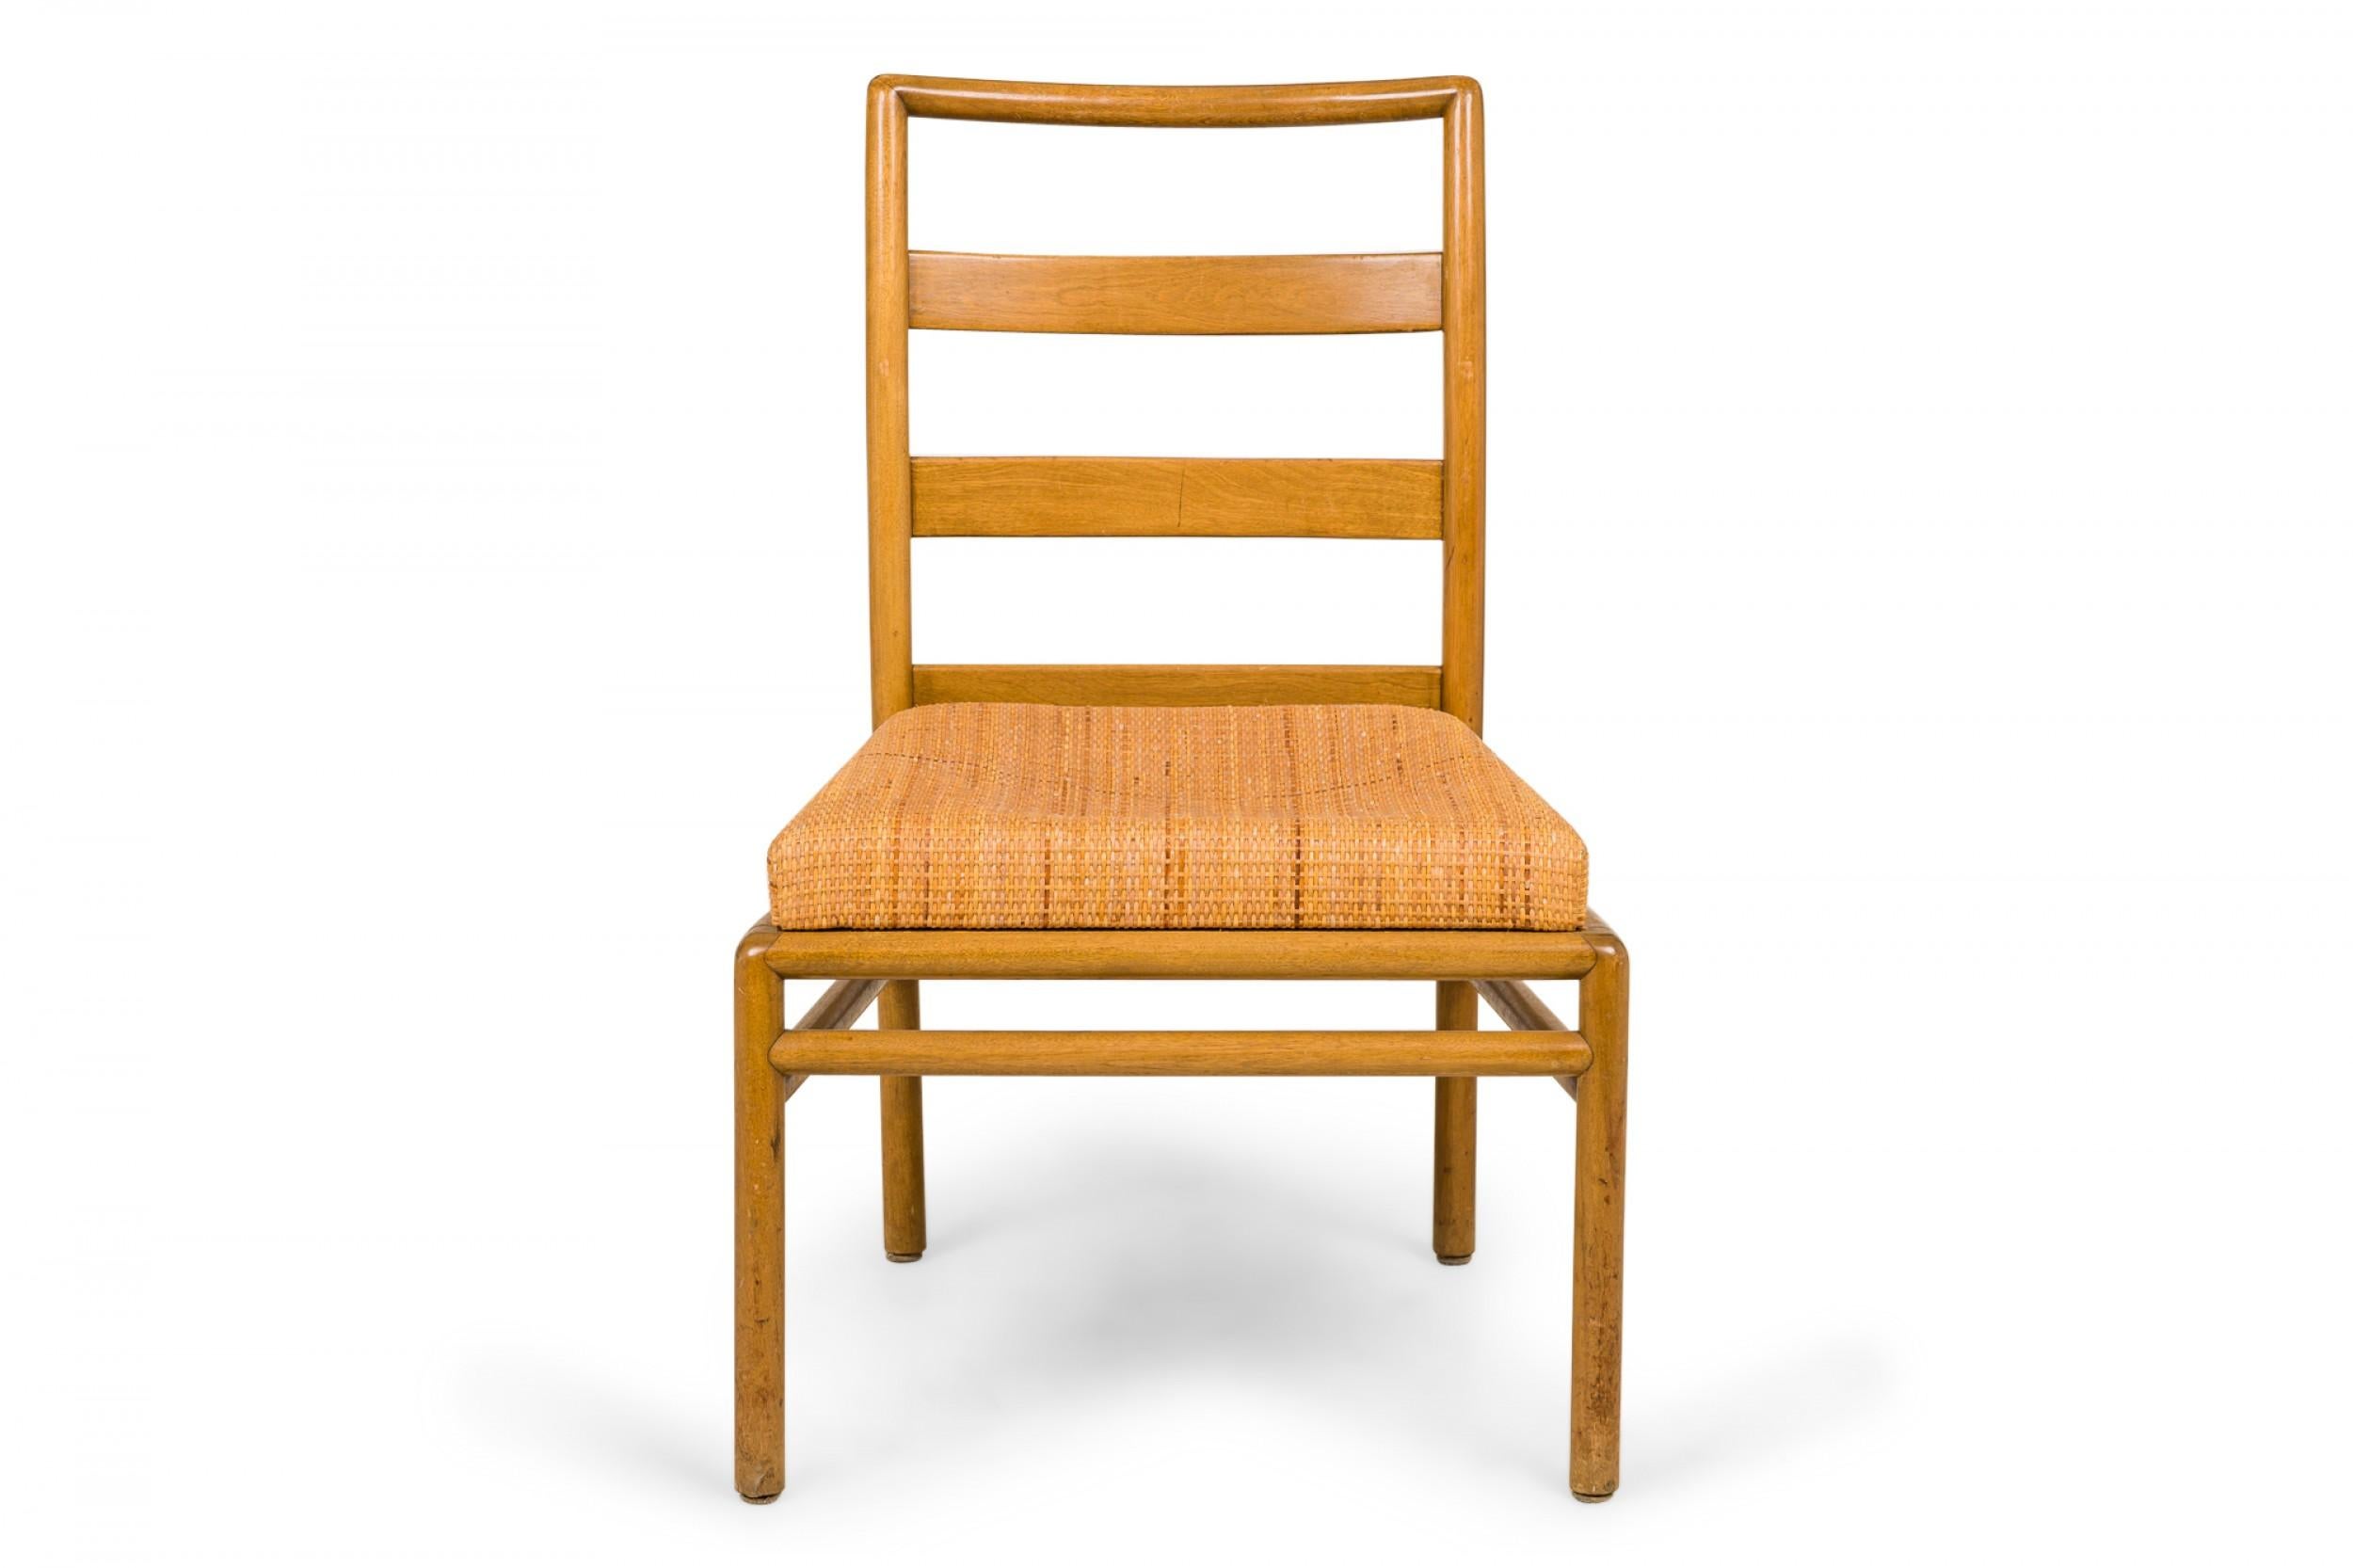 SET of 8 American mid-century dining side chairs with light wooden frames, woven rattan seats, and ladder backs, resting on four dowel legs with stretchers. (T.H. ROBSJOHN-GIBBINGS FOR WIDDICOMB FURNITURE COMPANY)(PRICED AS SET)